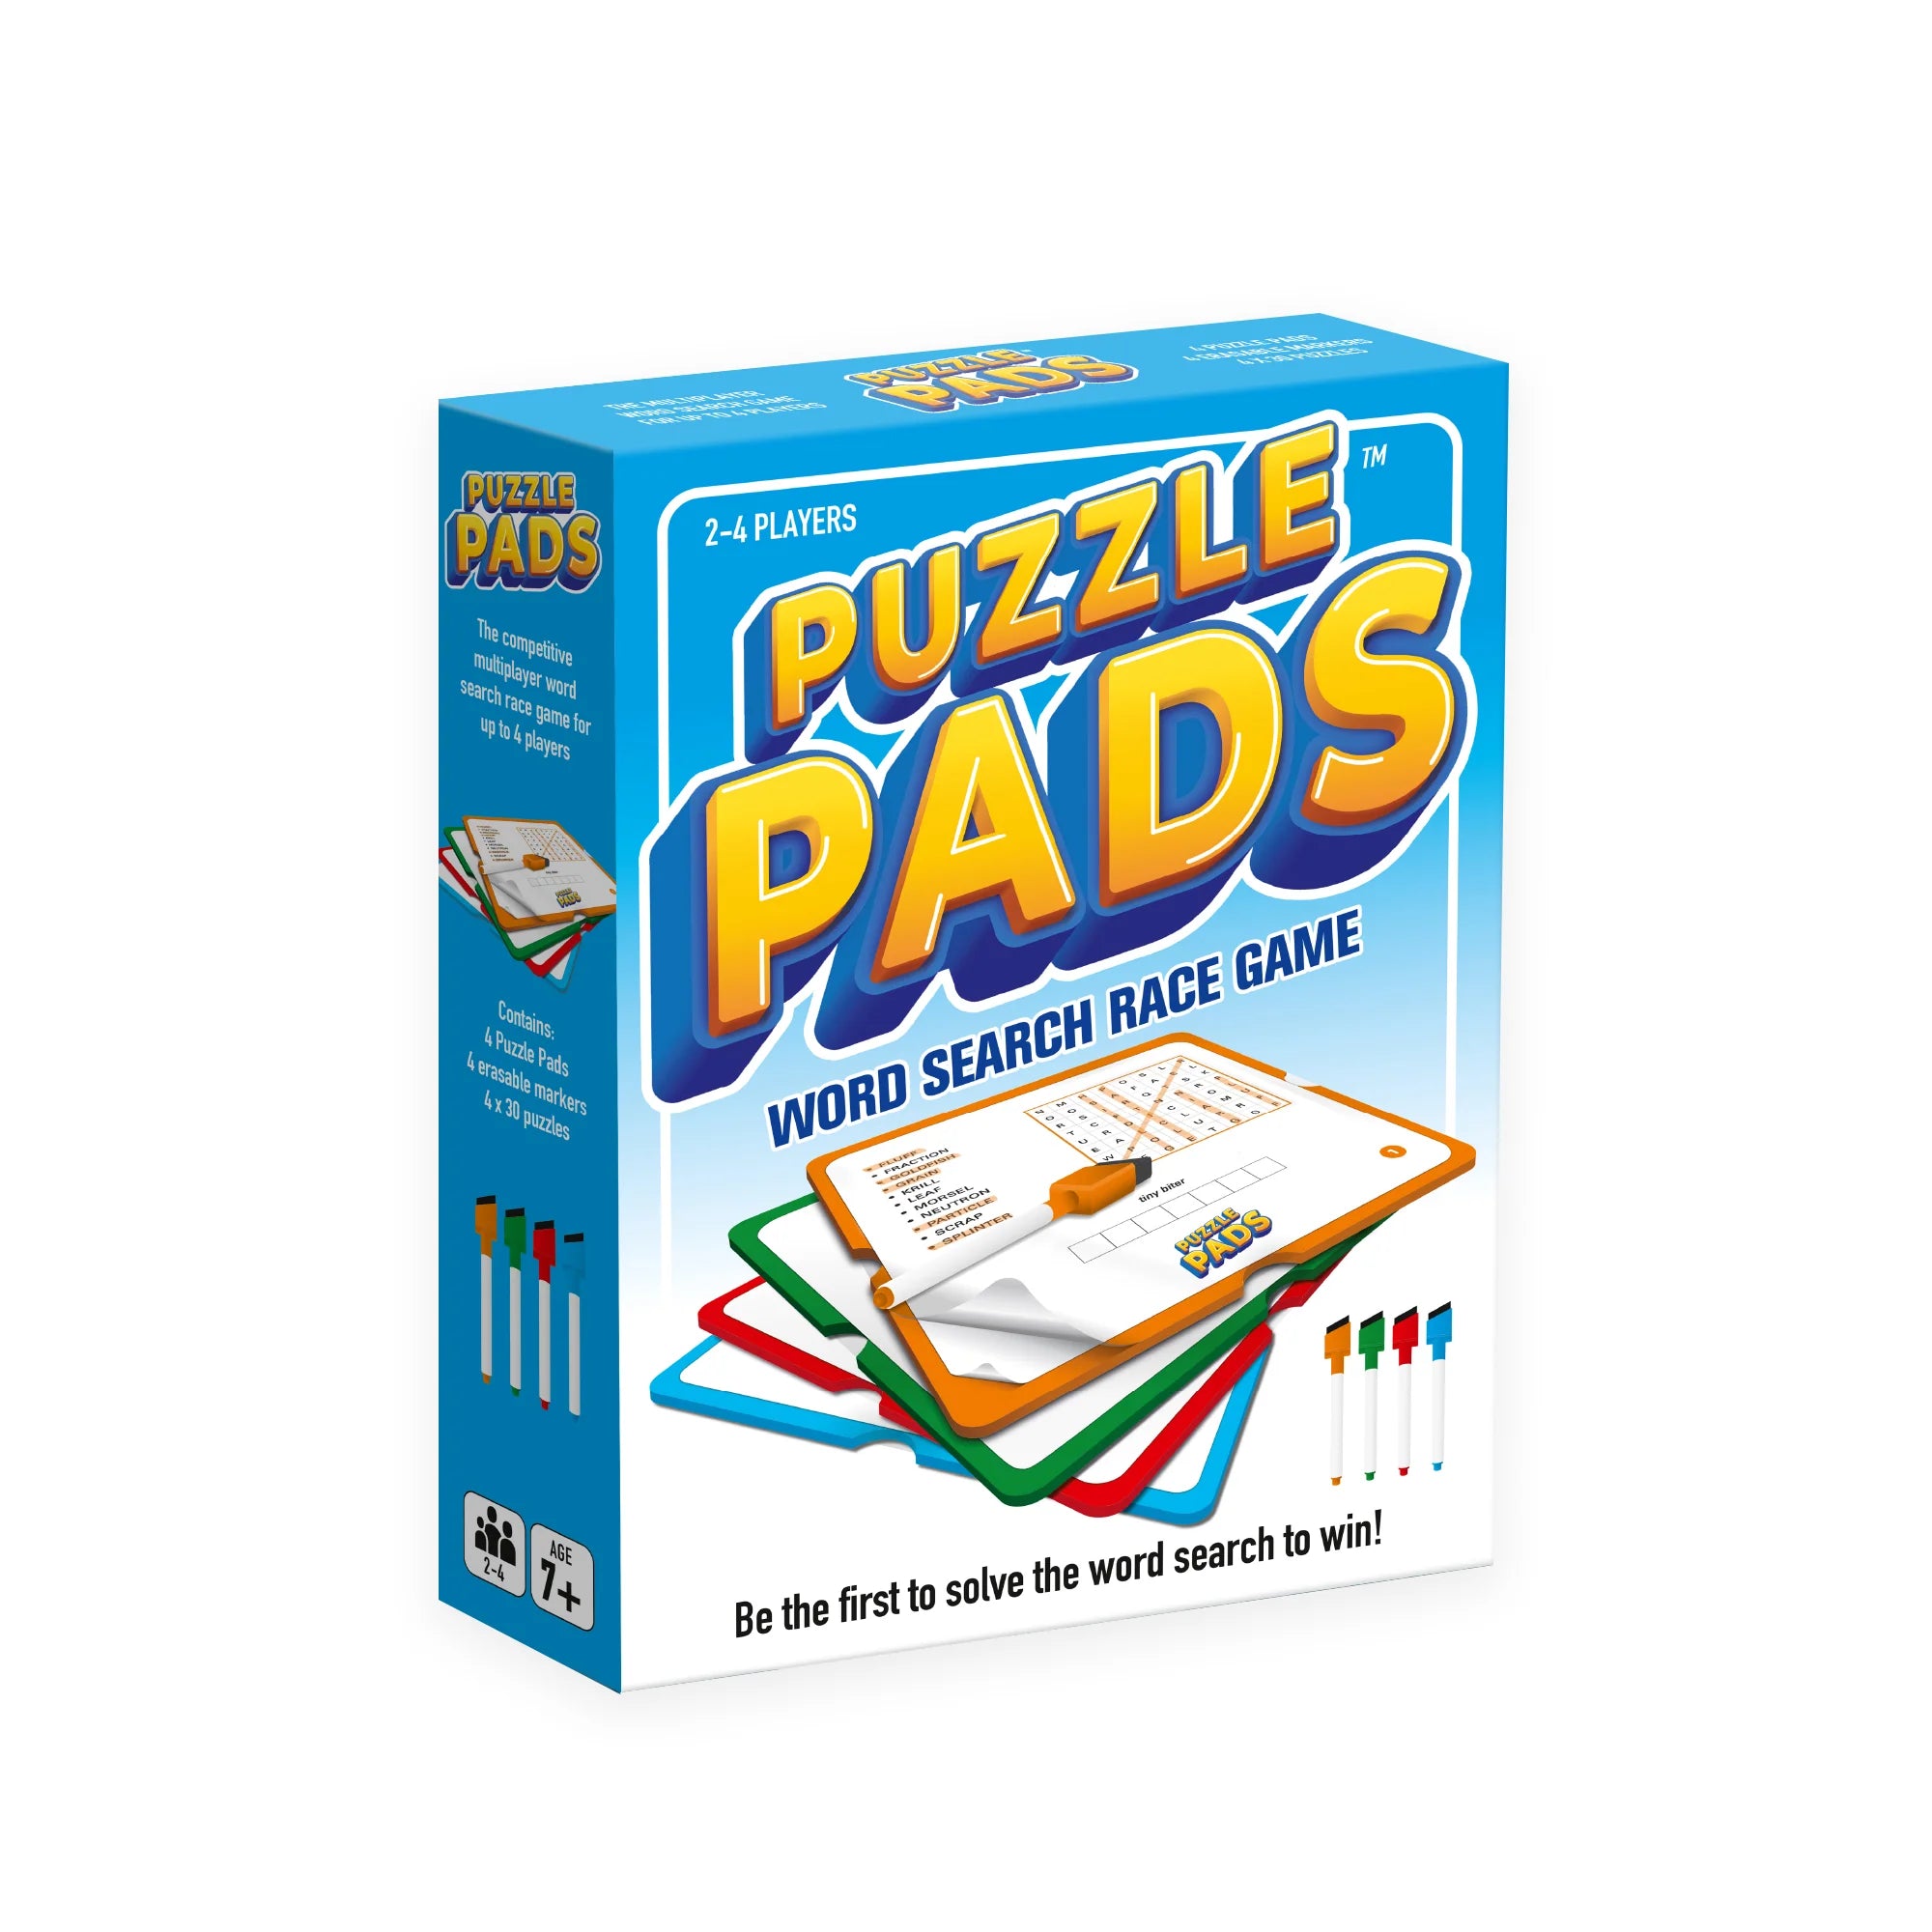 PuzzlePads Word Search